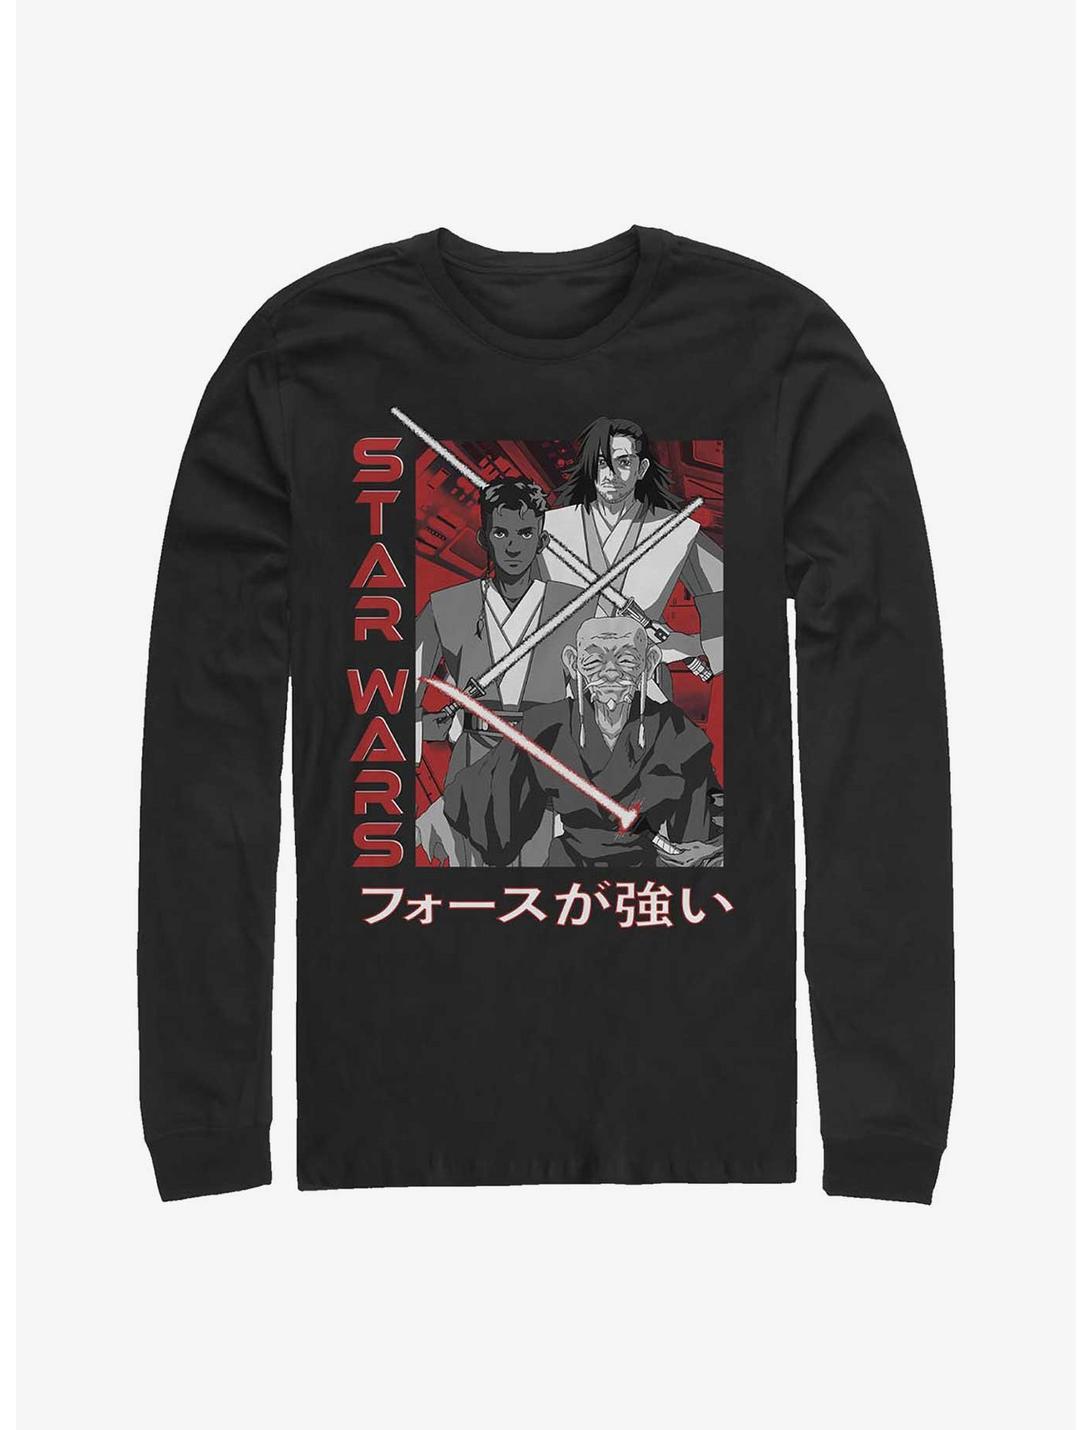 Star Wars: Visions Weapons Anime Long-Sleeve T-Shirt, BLACK, hi-res